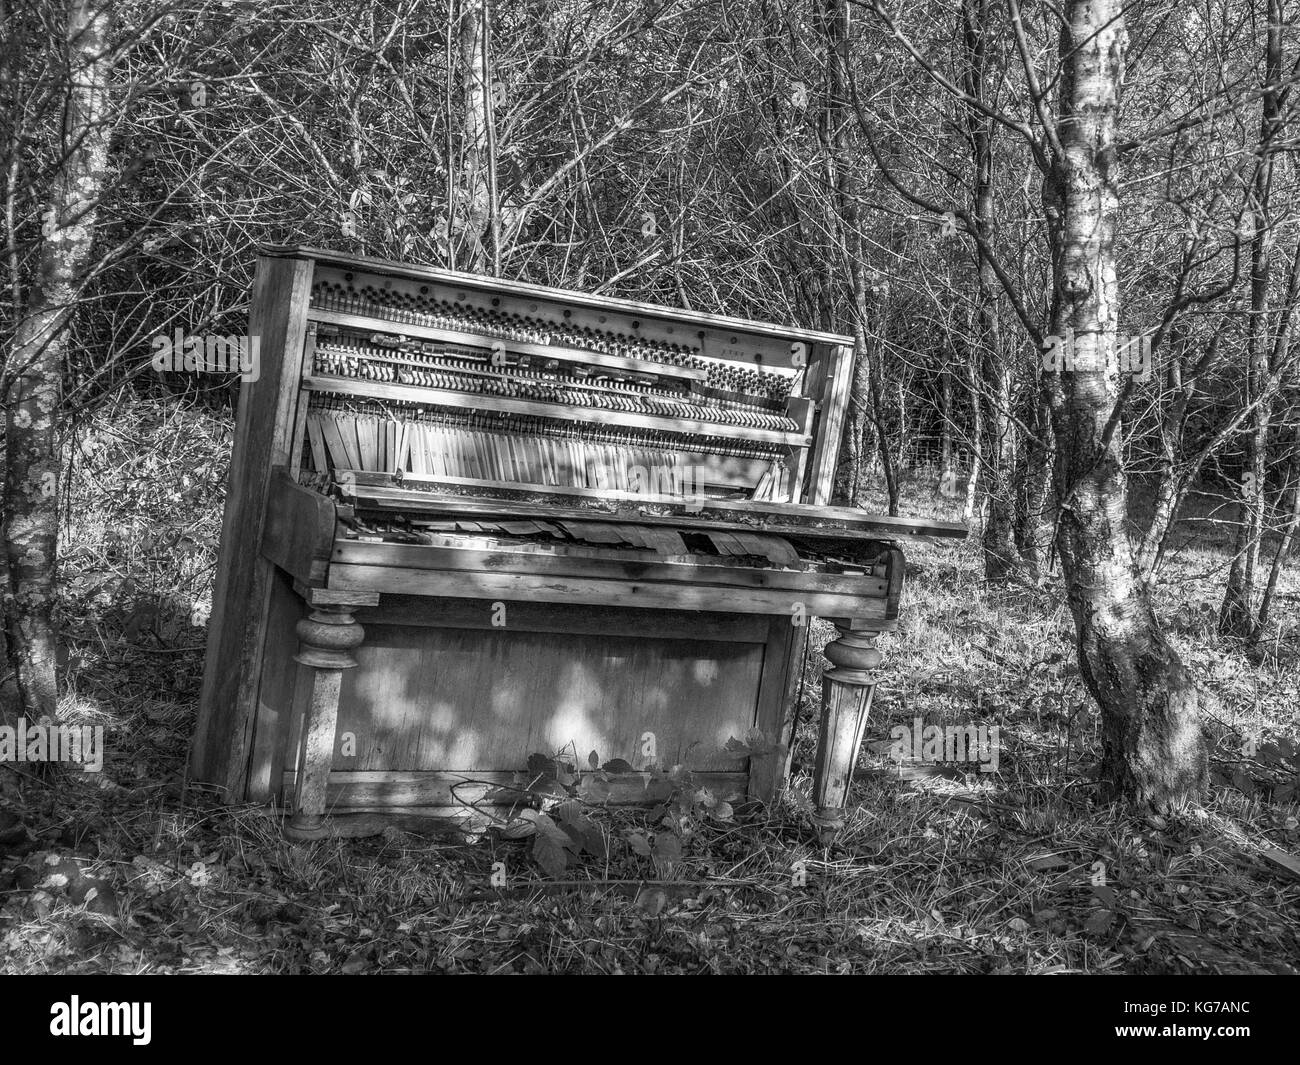 Old Piano Abandoned in the Welsh Woods, Monochrome Stock Photo